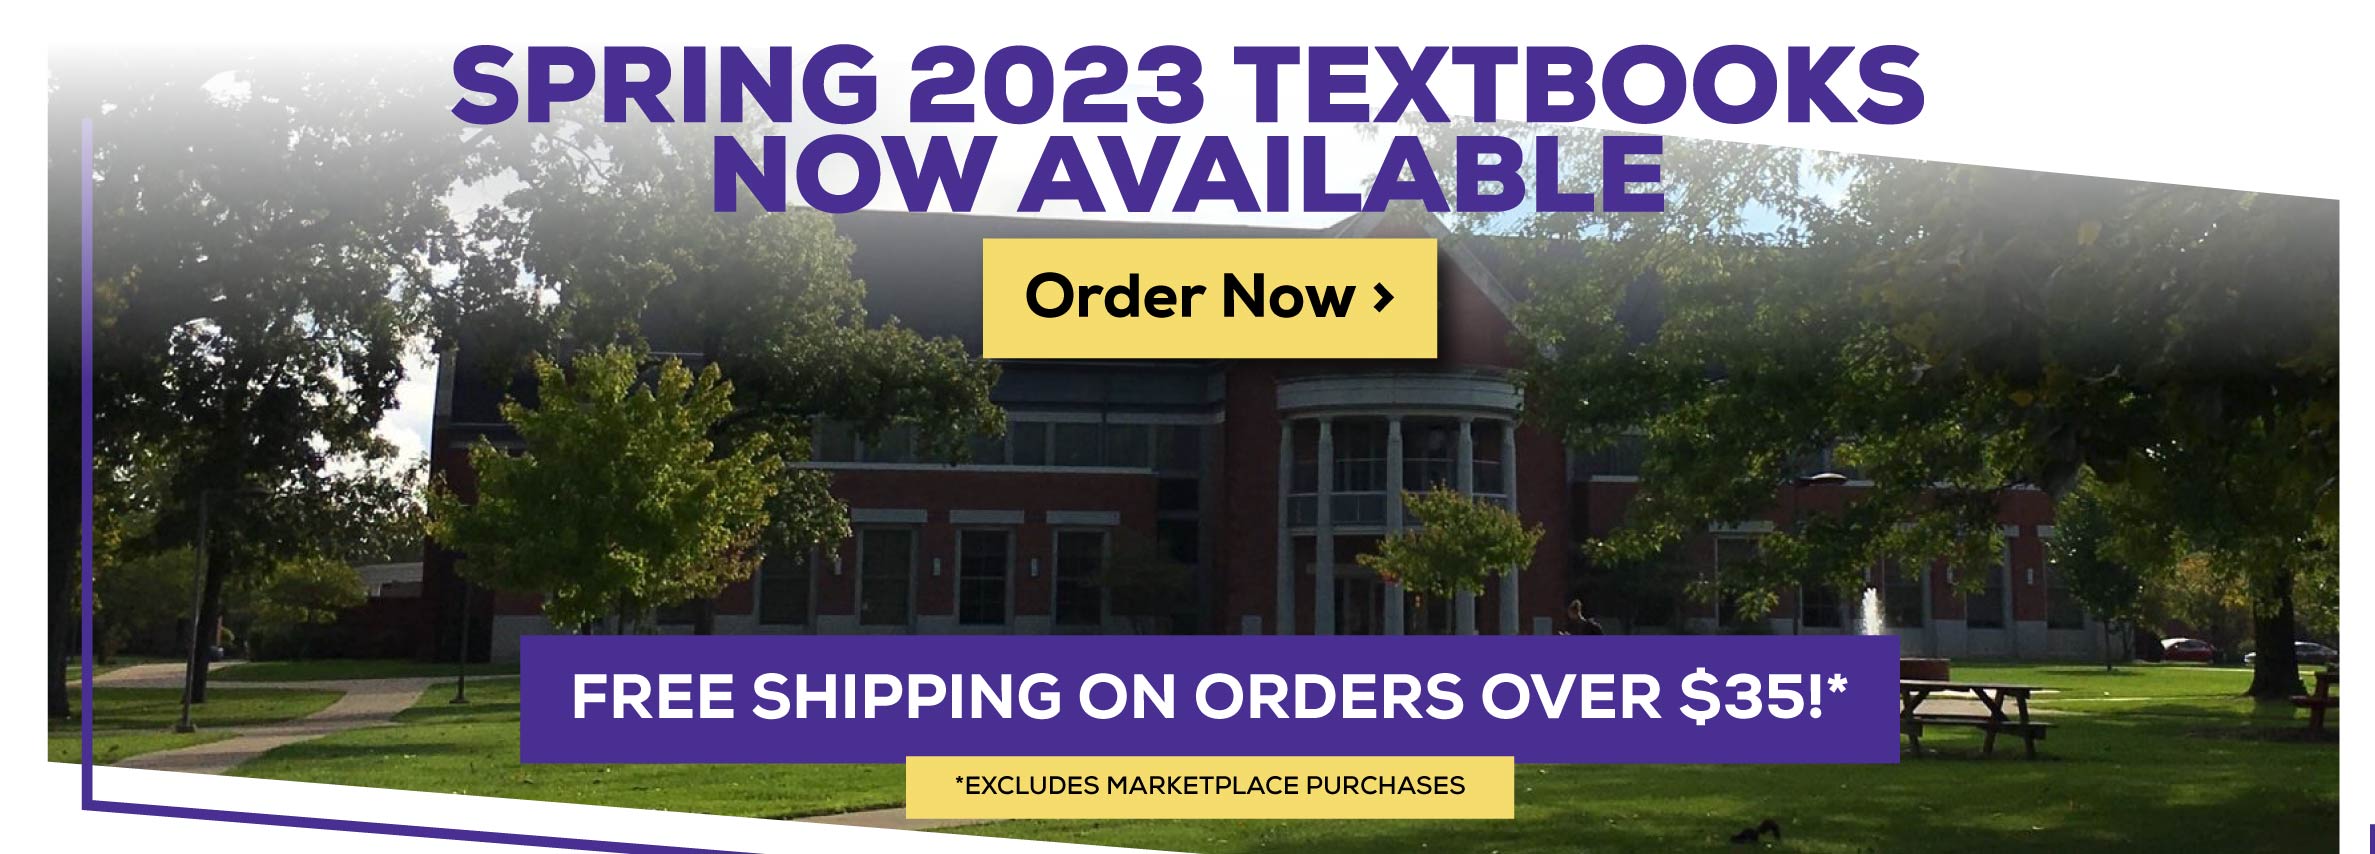 Spring 2023 Textbooks Now Available Order Now - Free Shipping on Orders Over $35!* Excludes Marketplace Purchases